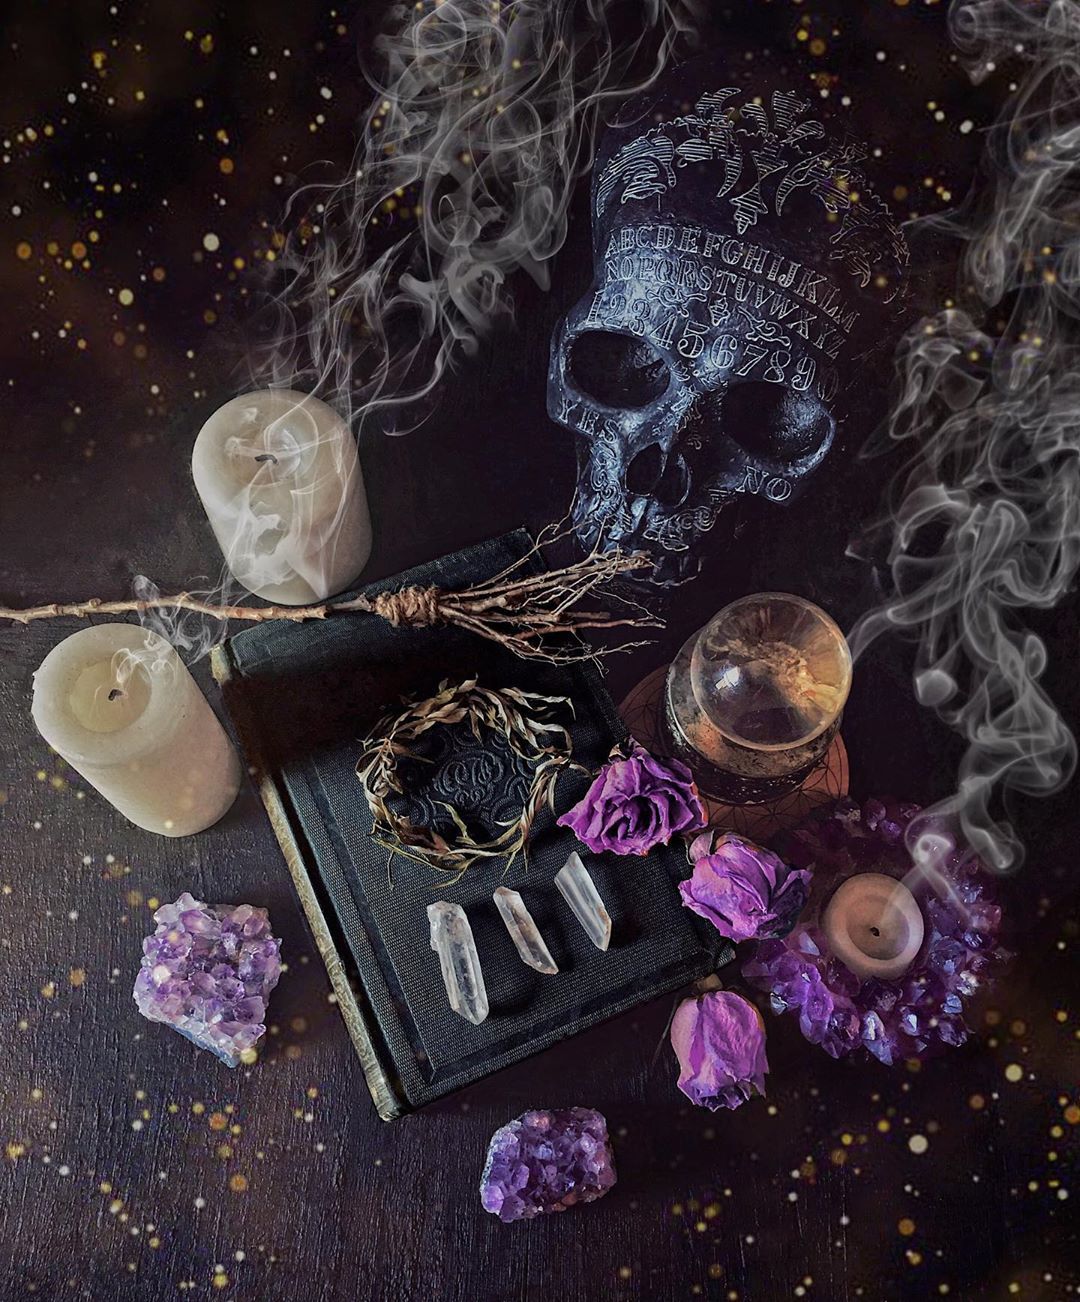 An image of a skull, crystals, and other witchy items. - Witchcore